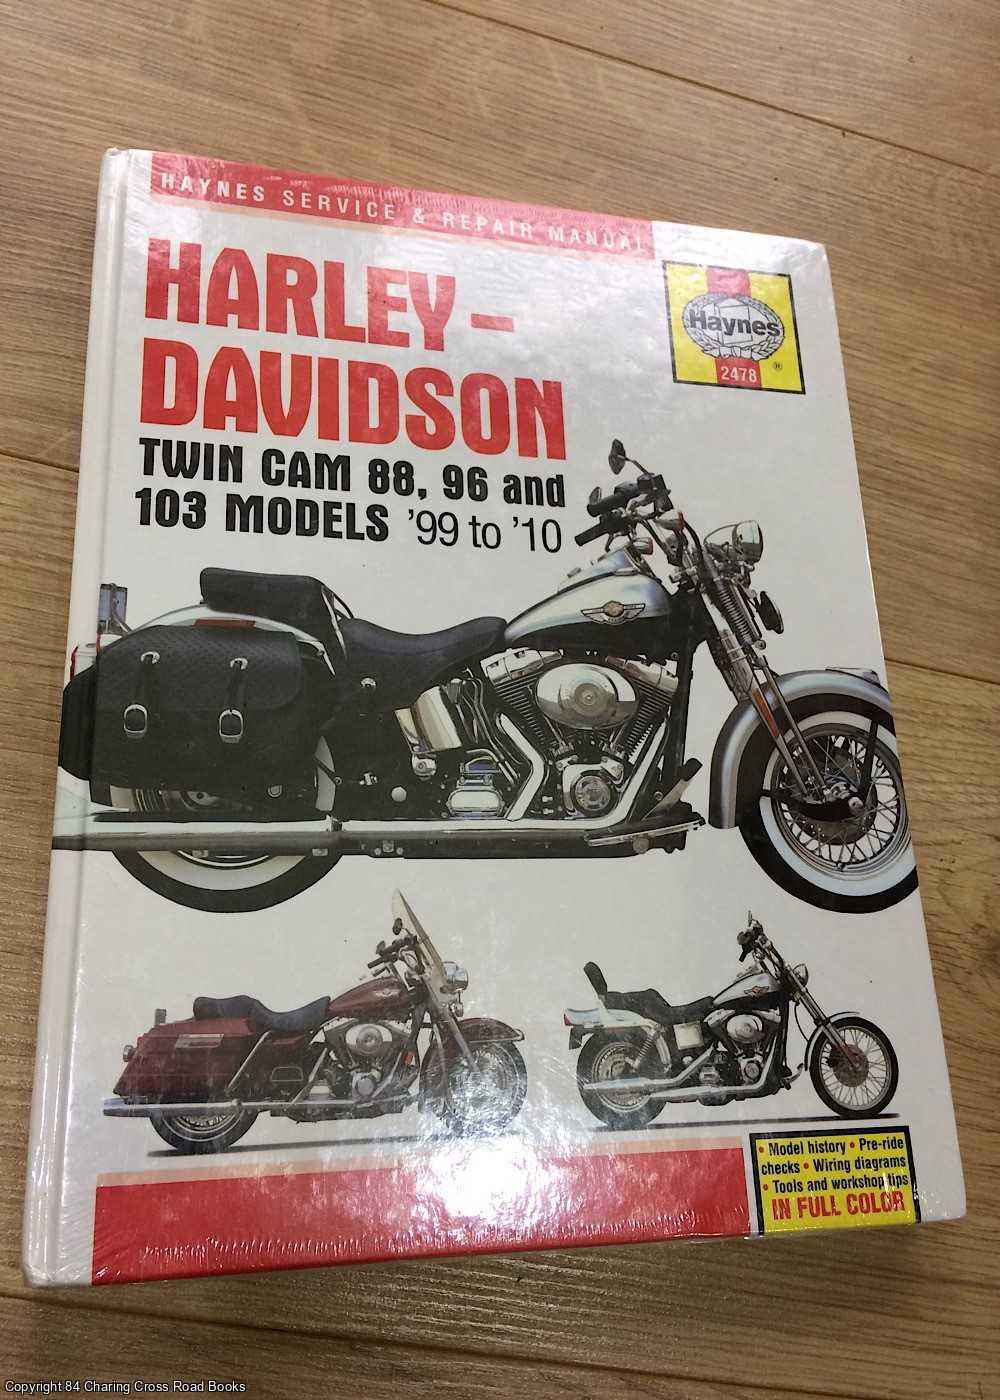 Alan Ahlstrand - Harley-Davidson: Twin Cam 88, 96 and 103 Models '99 to '10